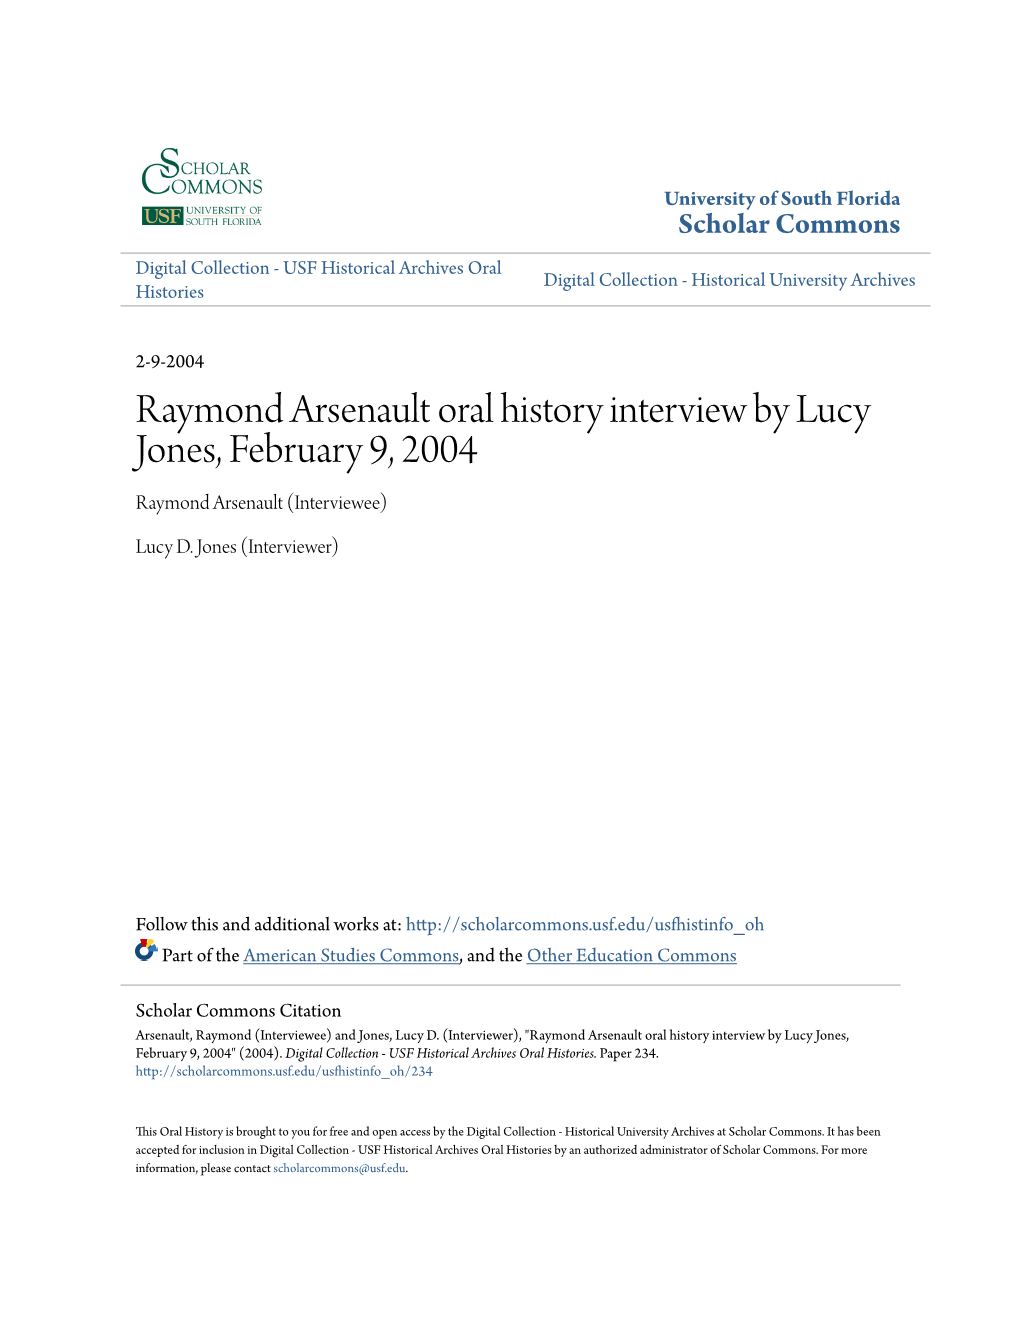 Raymond Arsenault Oral History Interview by Lucy Jones, February 9, 2004 Raymond Arsenault (Interviewee)